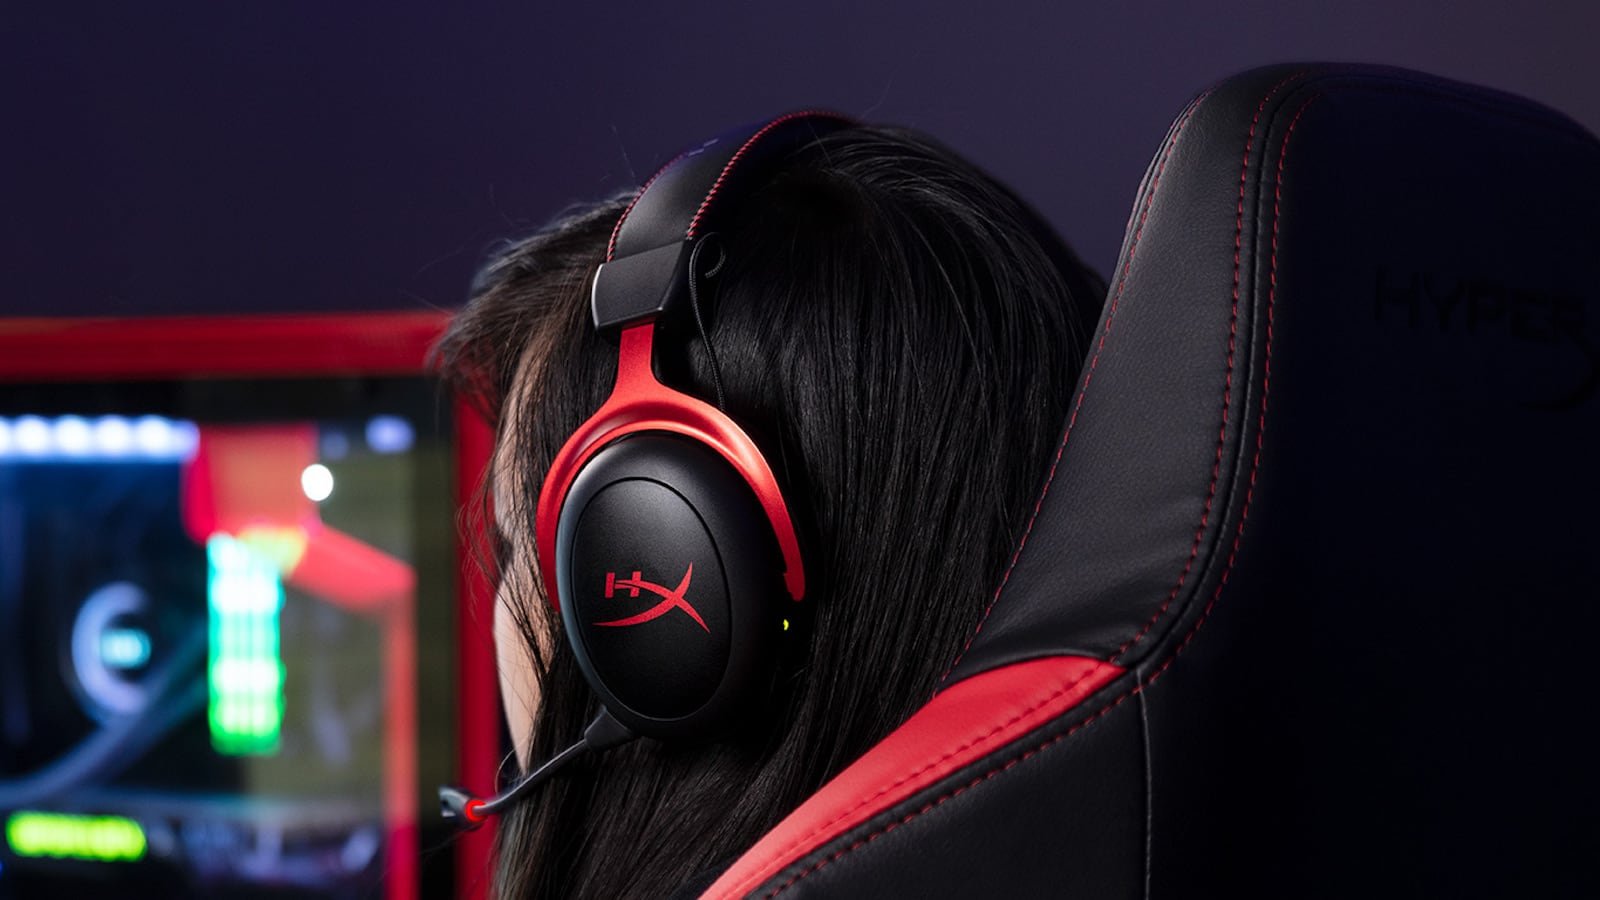 HyperX Cloud II gaming headset offers an exceptionally comfortable design